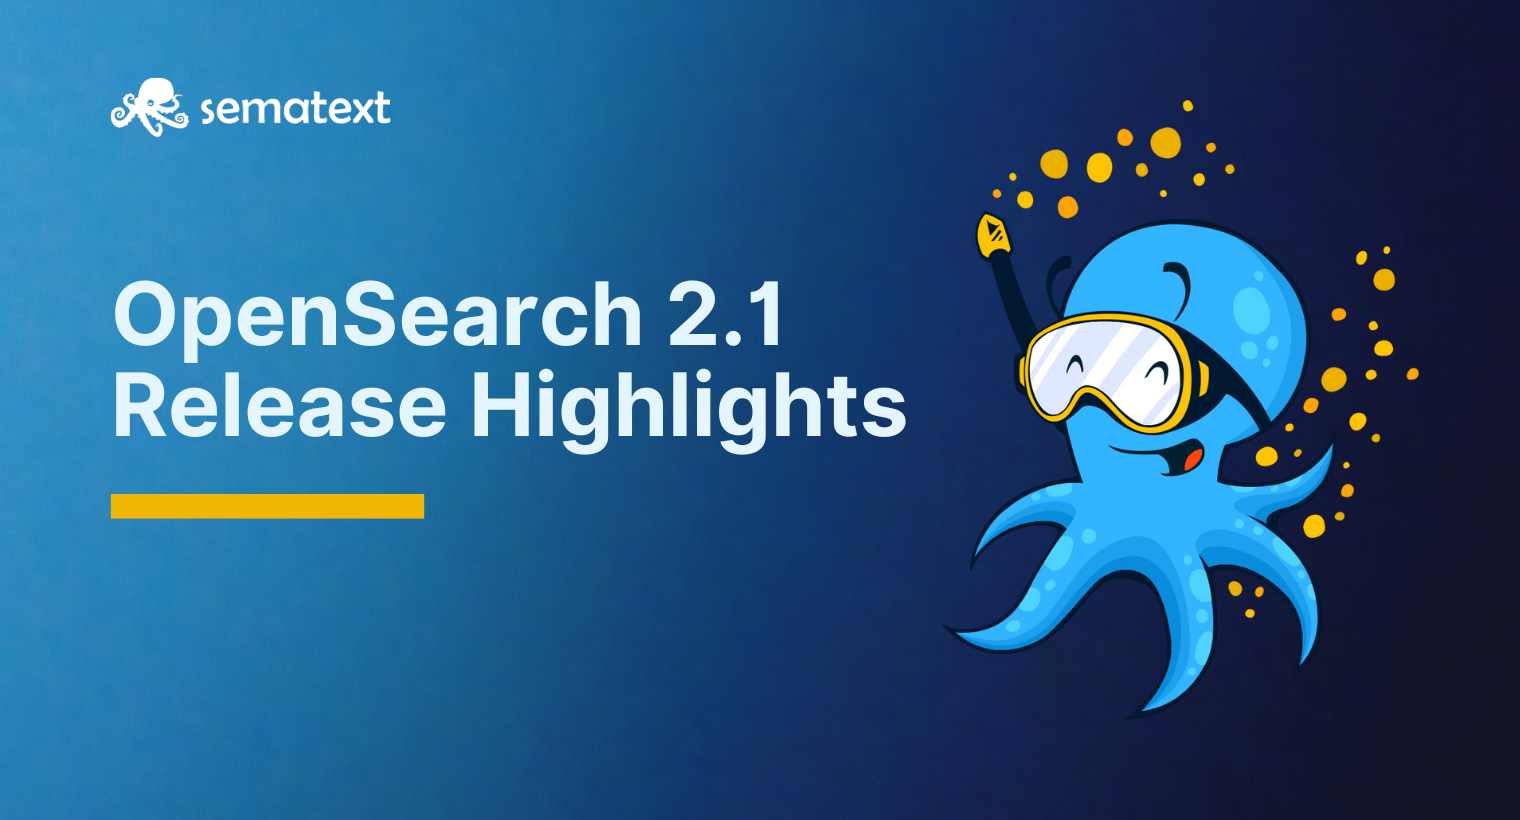 OpenSearch 2.1 Release Highlights